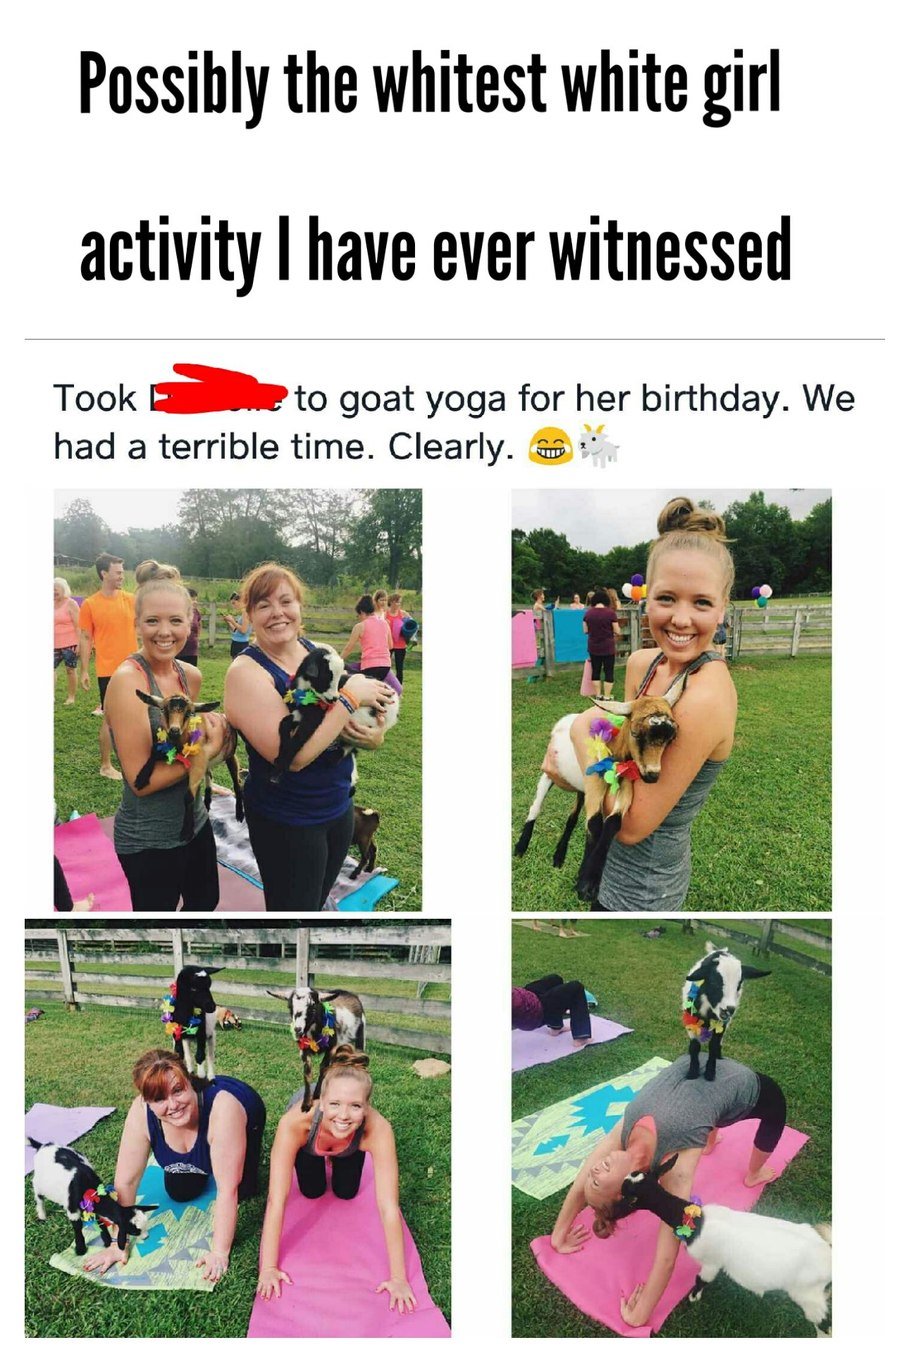 Never knew goats and yoga go together - meme